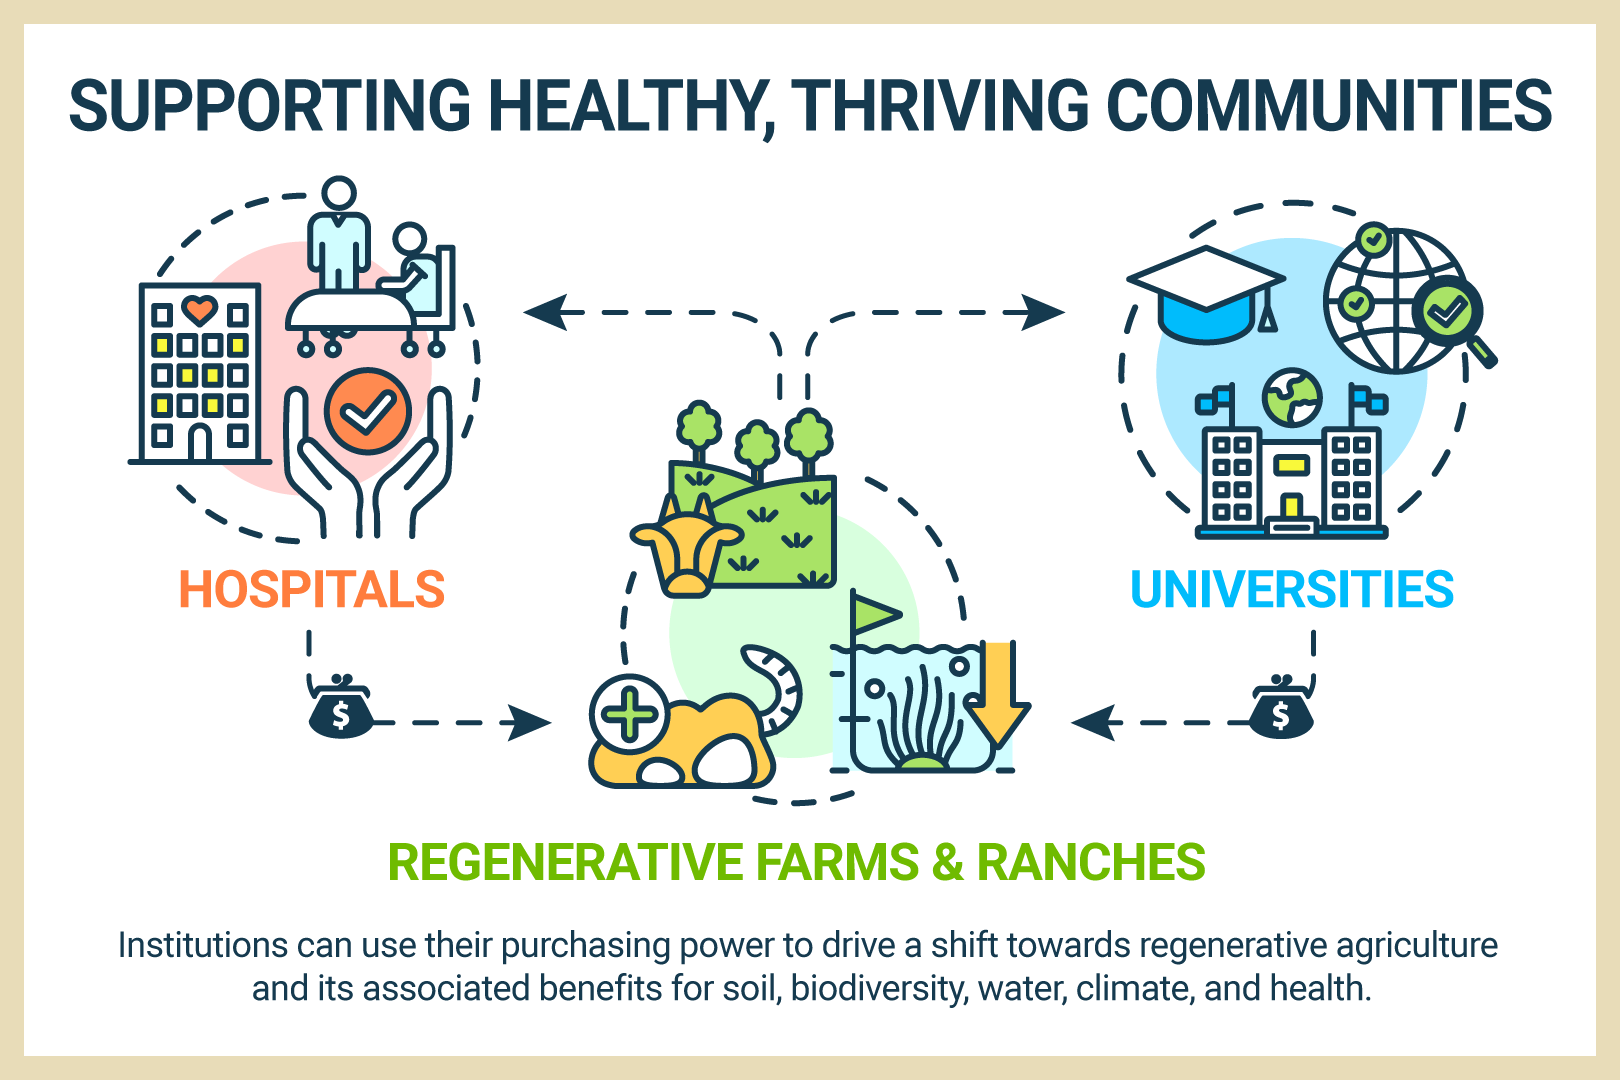 Institutions can use their purchasing power to drive a shift towards regenerative agriculture and its associated benefits for soil, biodiversity, water, climate, and health.